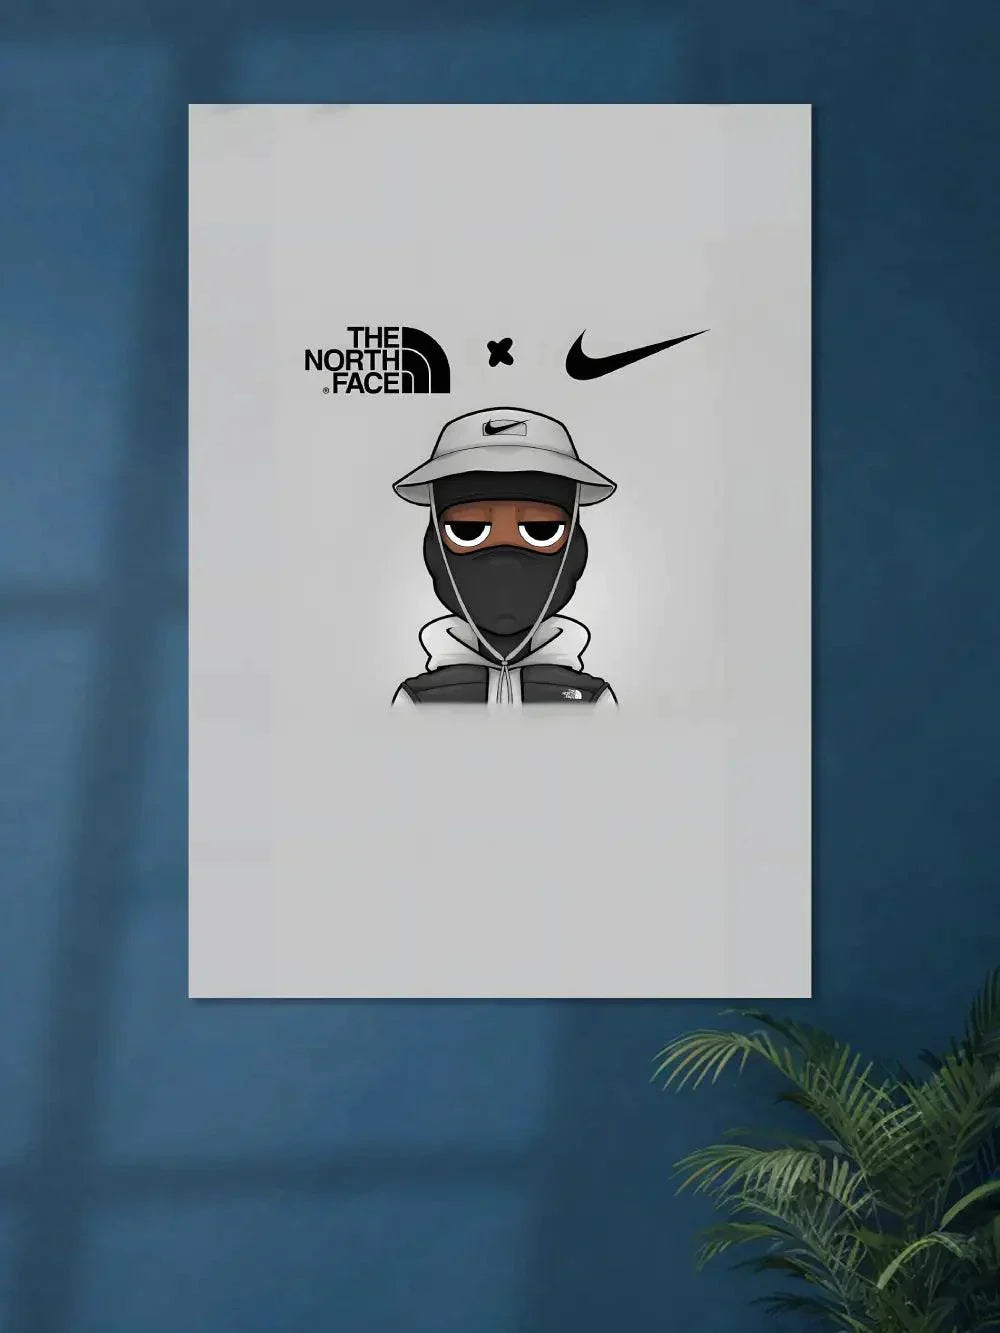 The North Face X Nike Poster - Poster Wiz